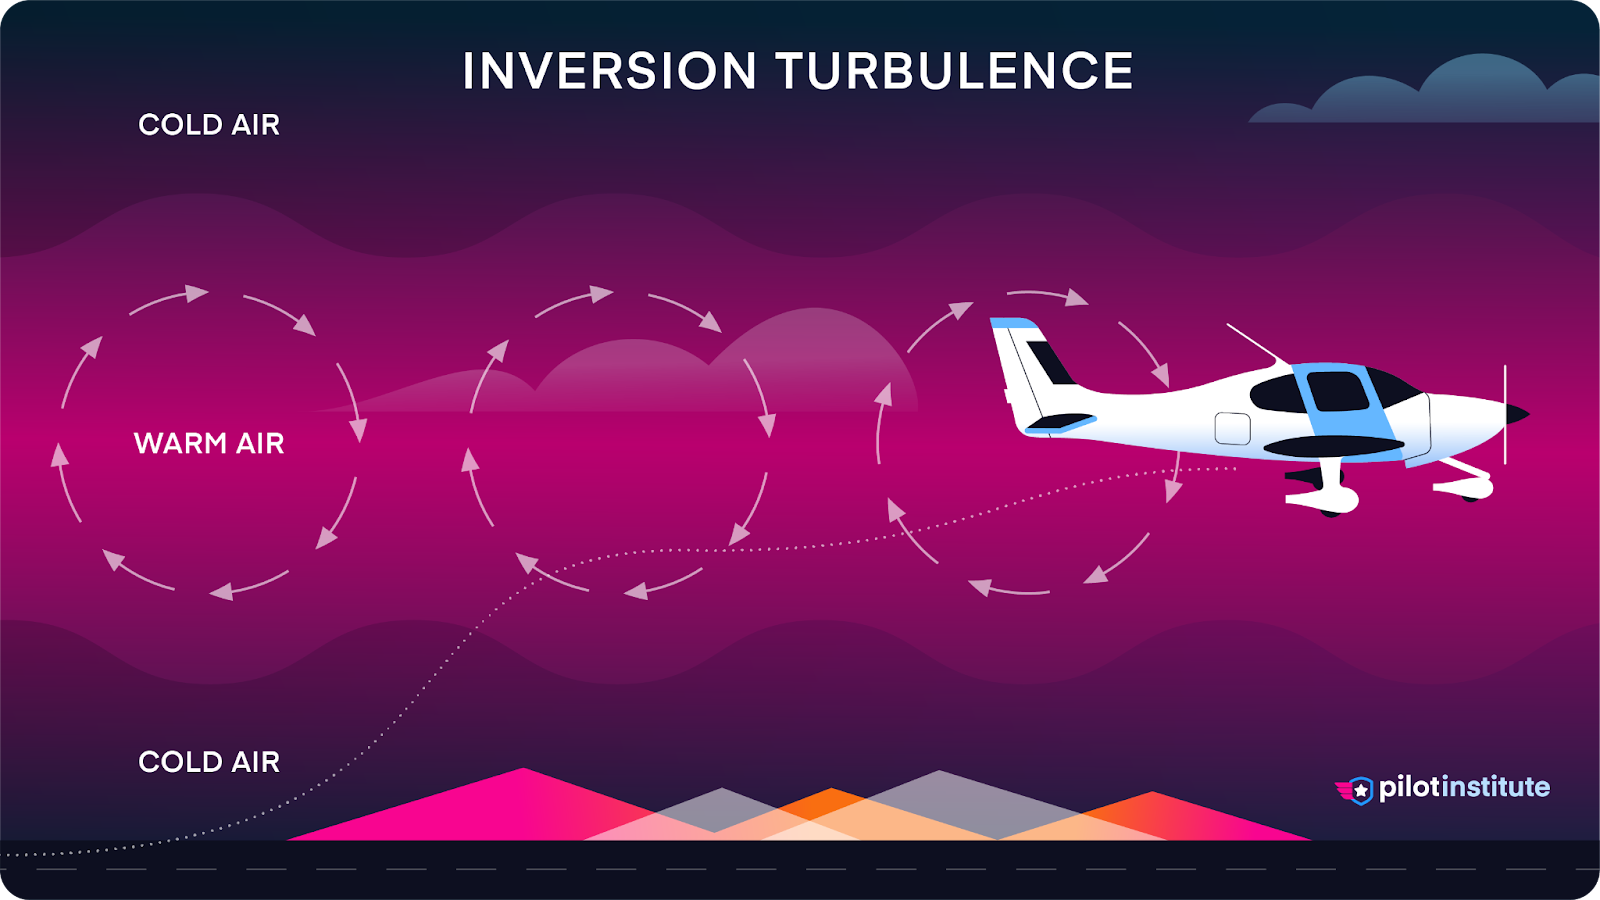 A diagram showing inversion turbulence.